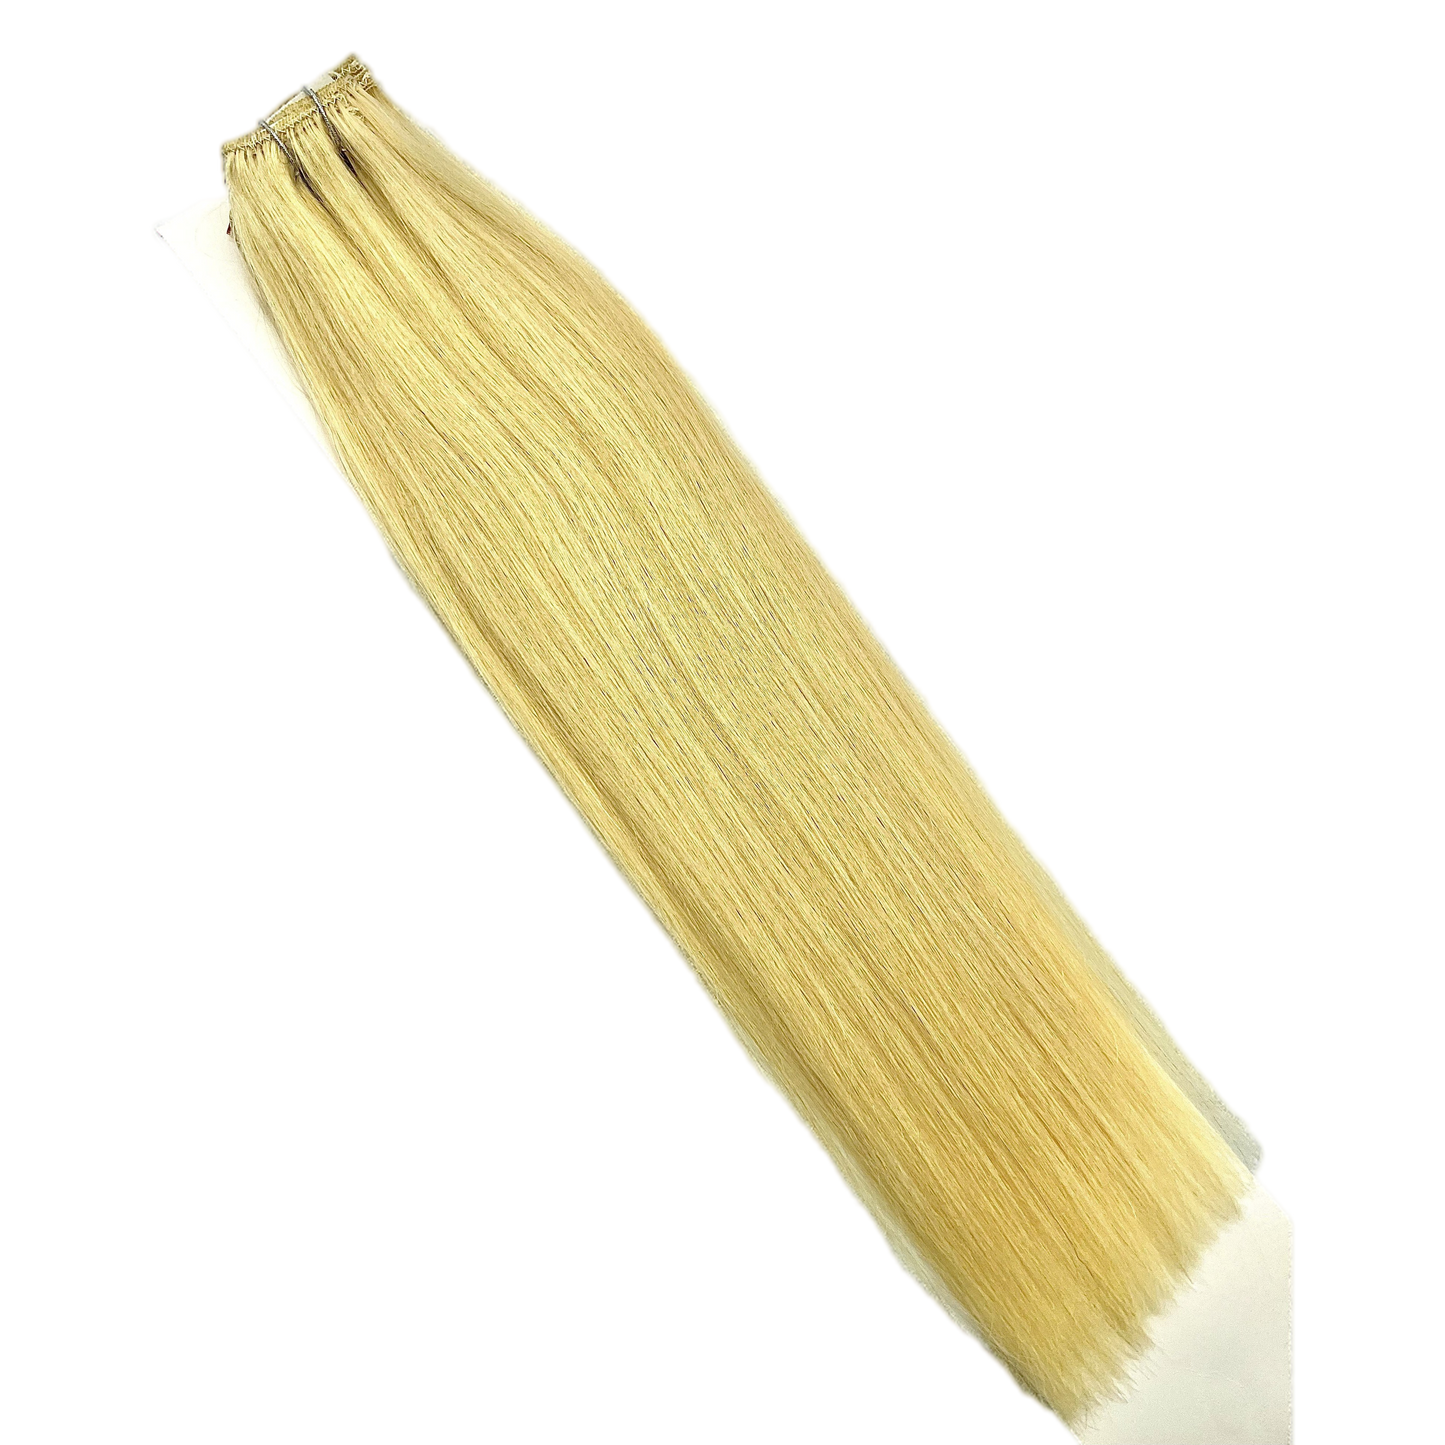 VIP Clip Extensions / Silky Straight - 18" (140 g ) ClipeX System